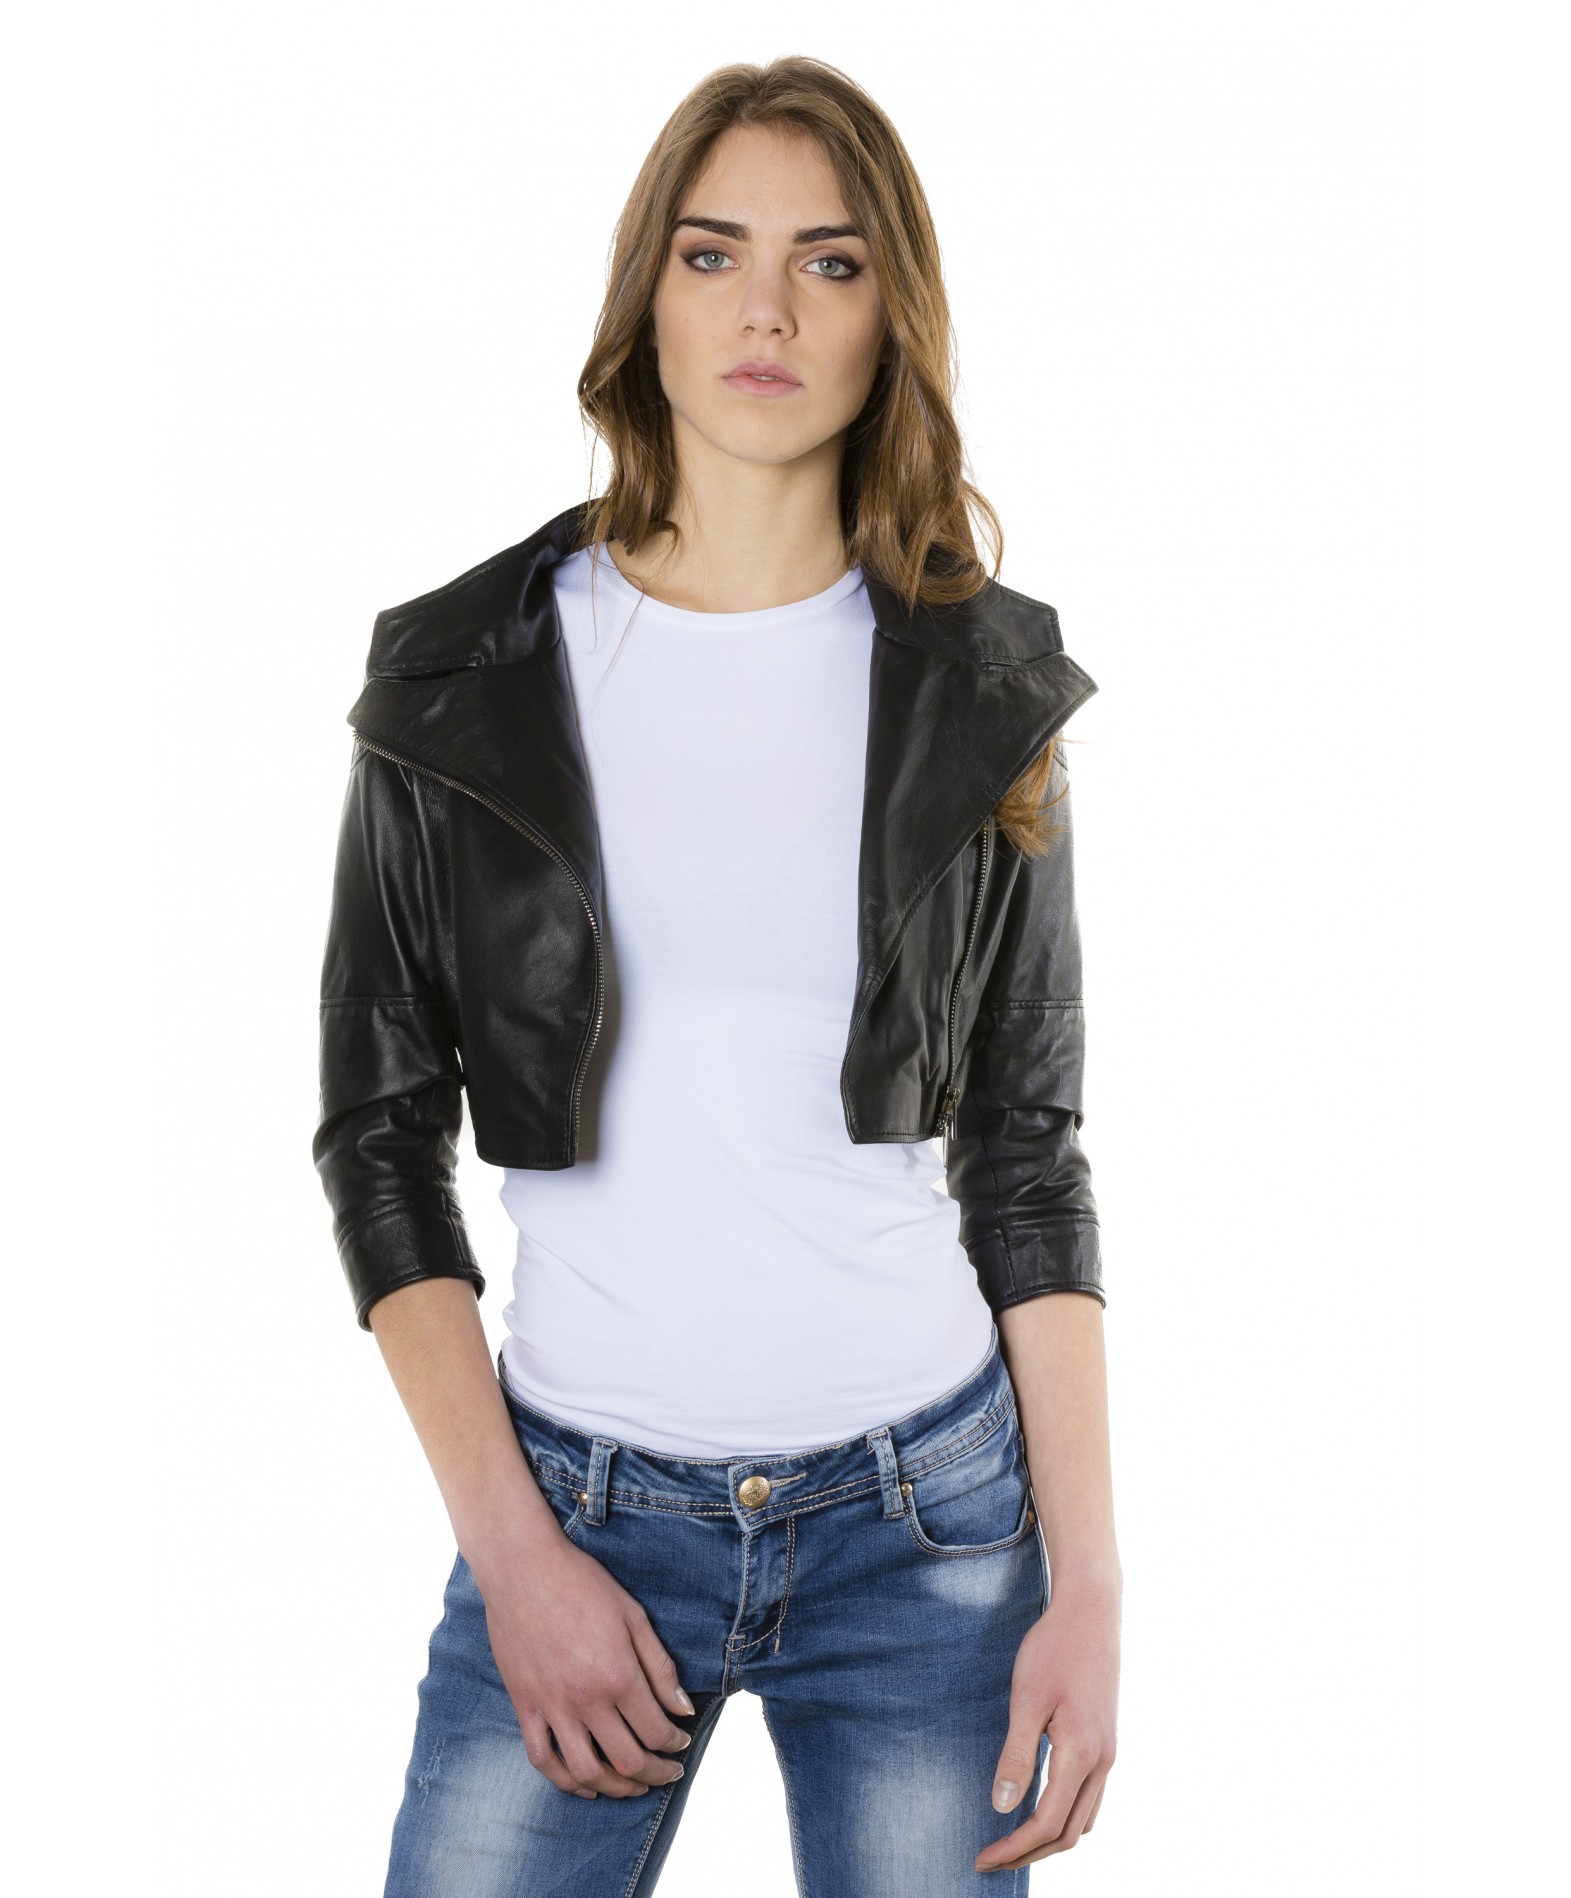 FIAMMA - black Color - Nappa Lamb Short Leather Jacket Smooth Effect ...